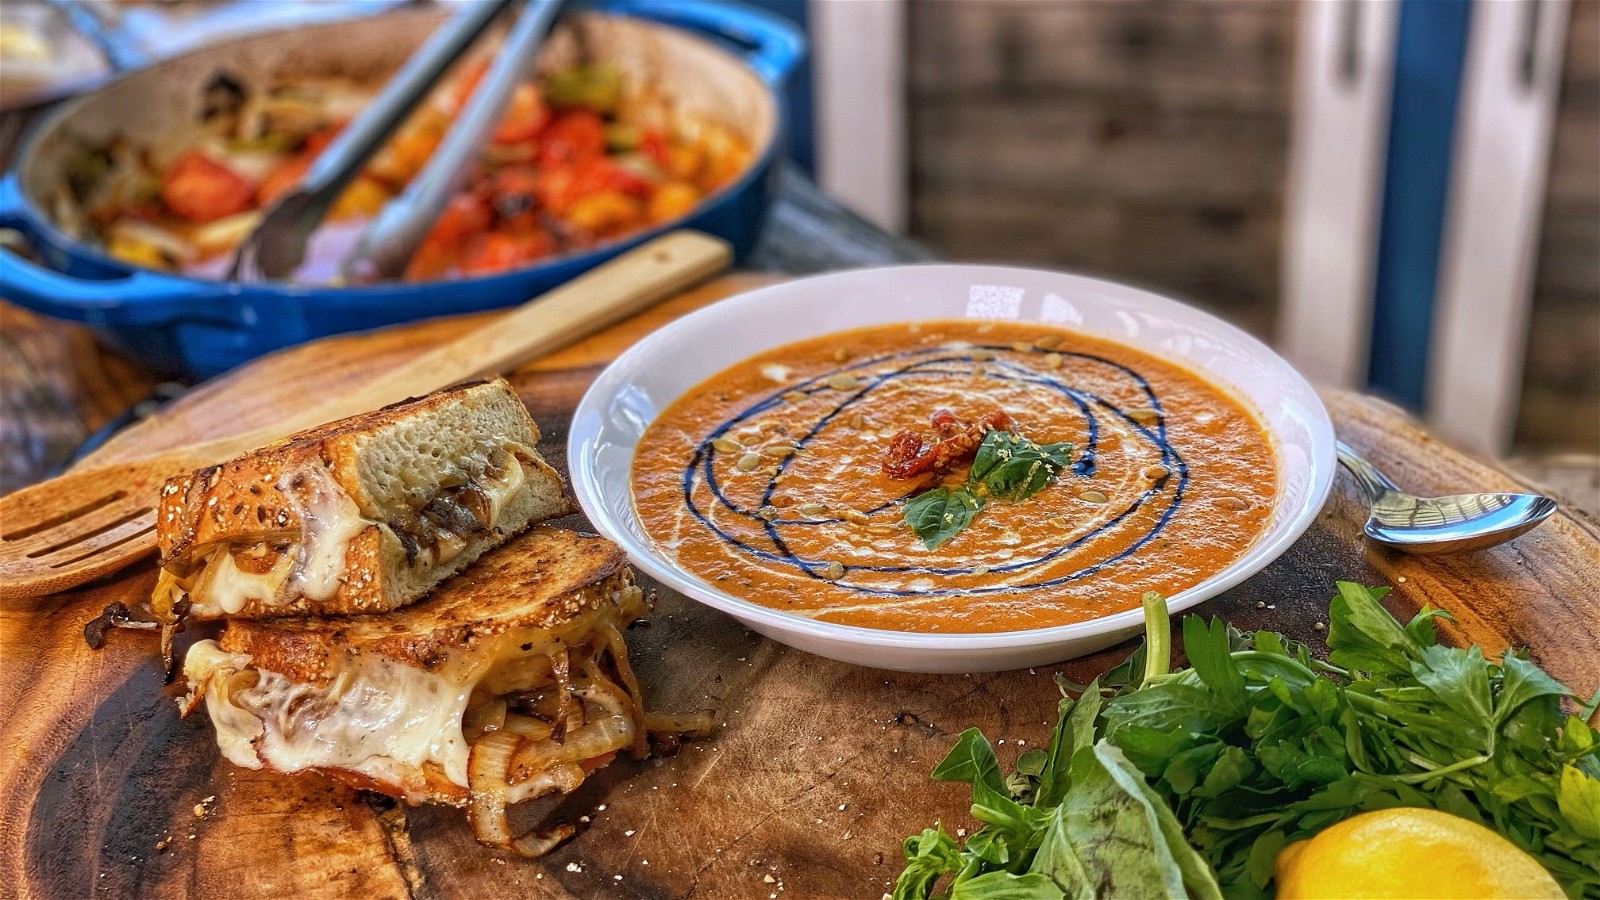 Image of Roasted Creamy Tomato Soup and Grilled Cheese